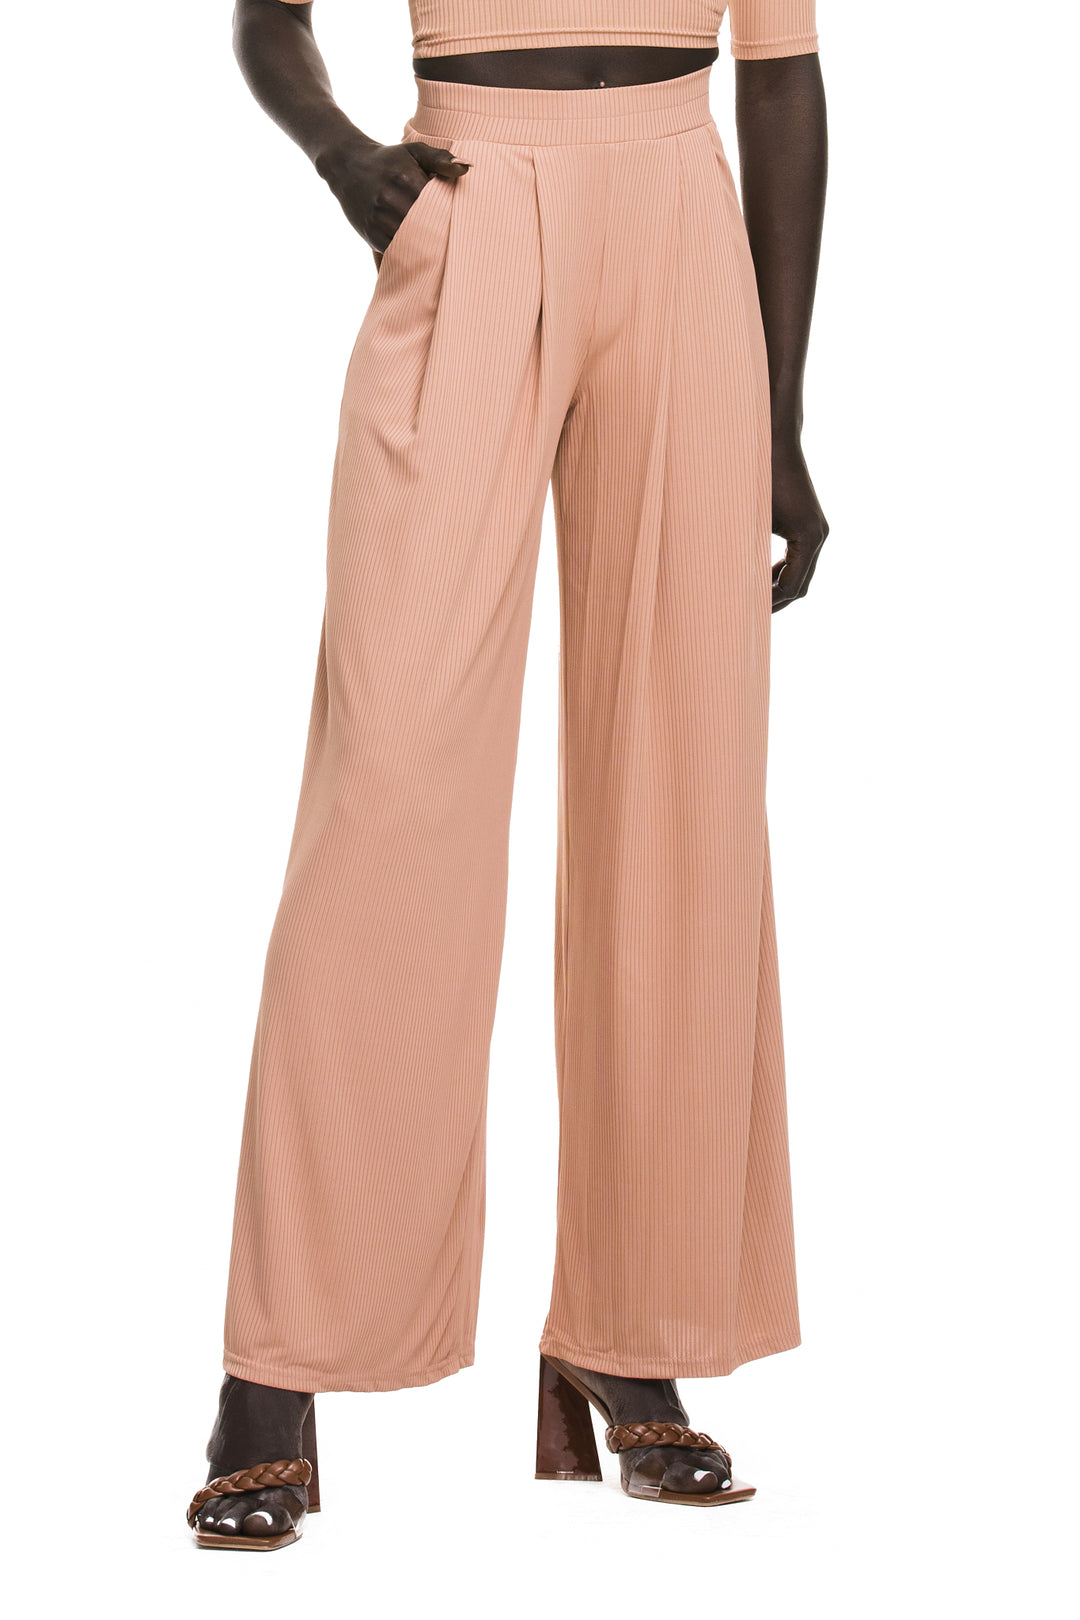 Brigitte Taupe Ribbed Wide Leg Pants - Expressive Collective CO.